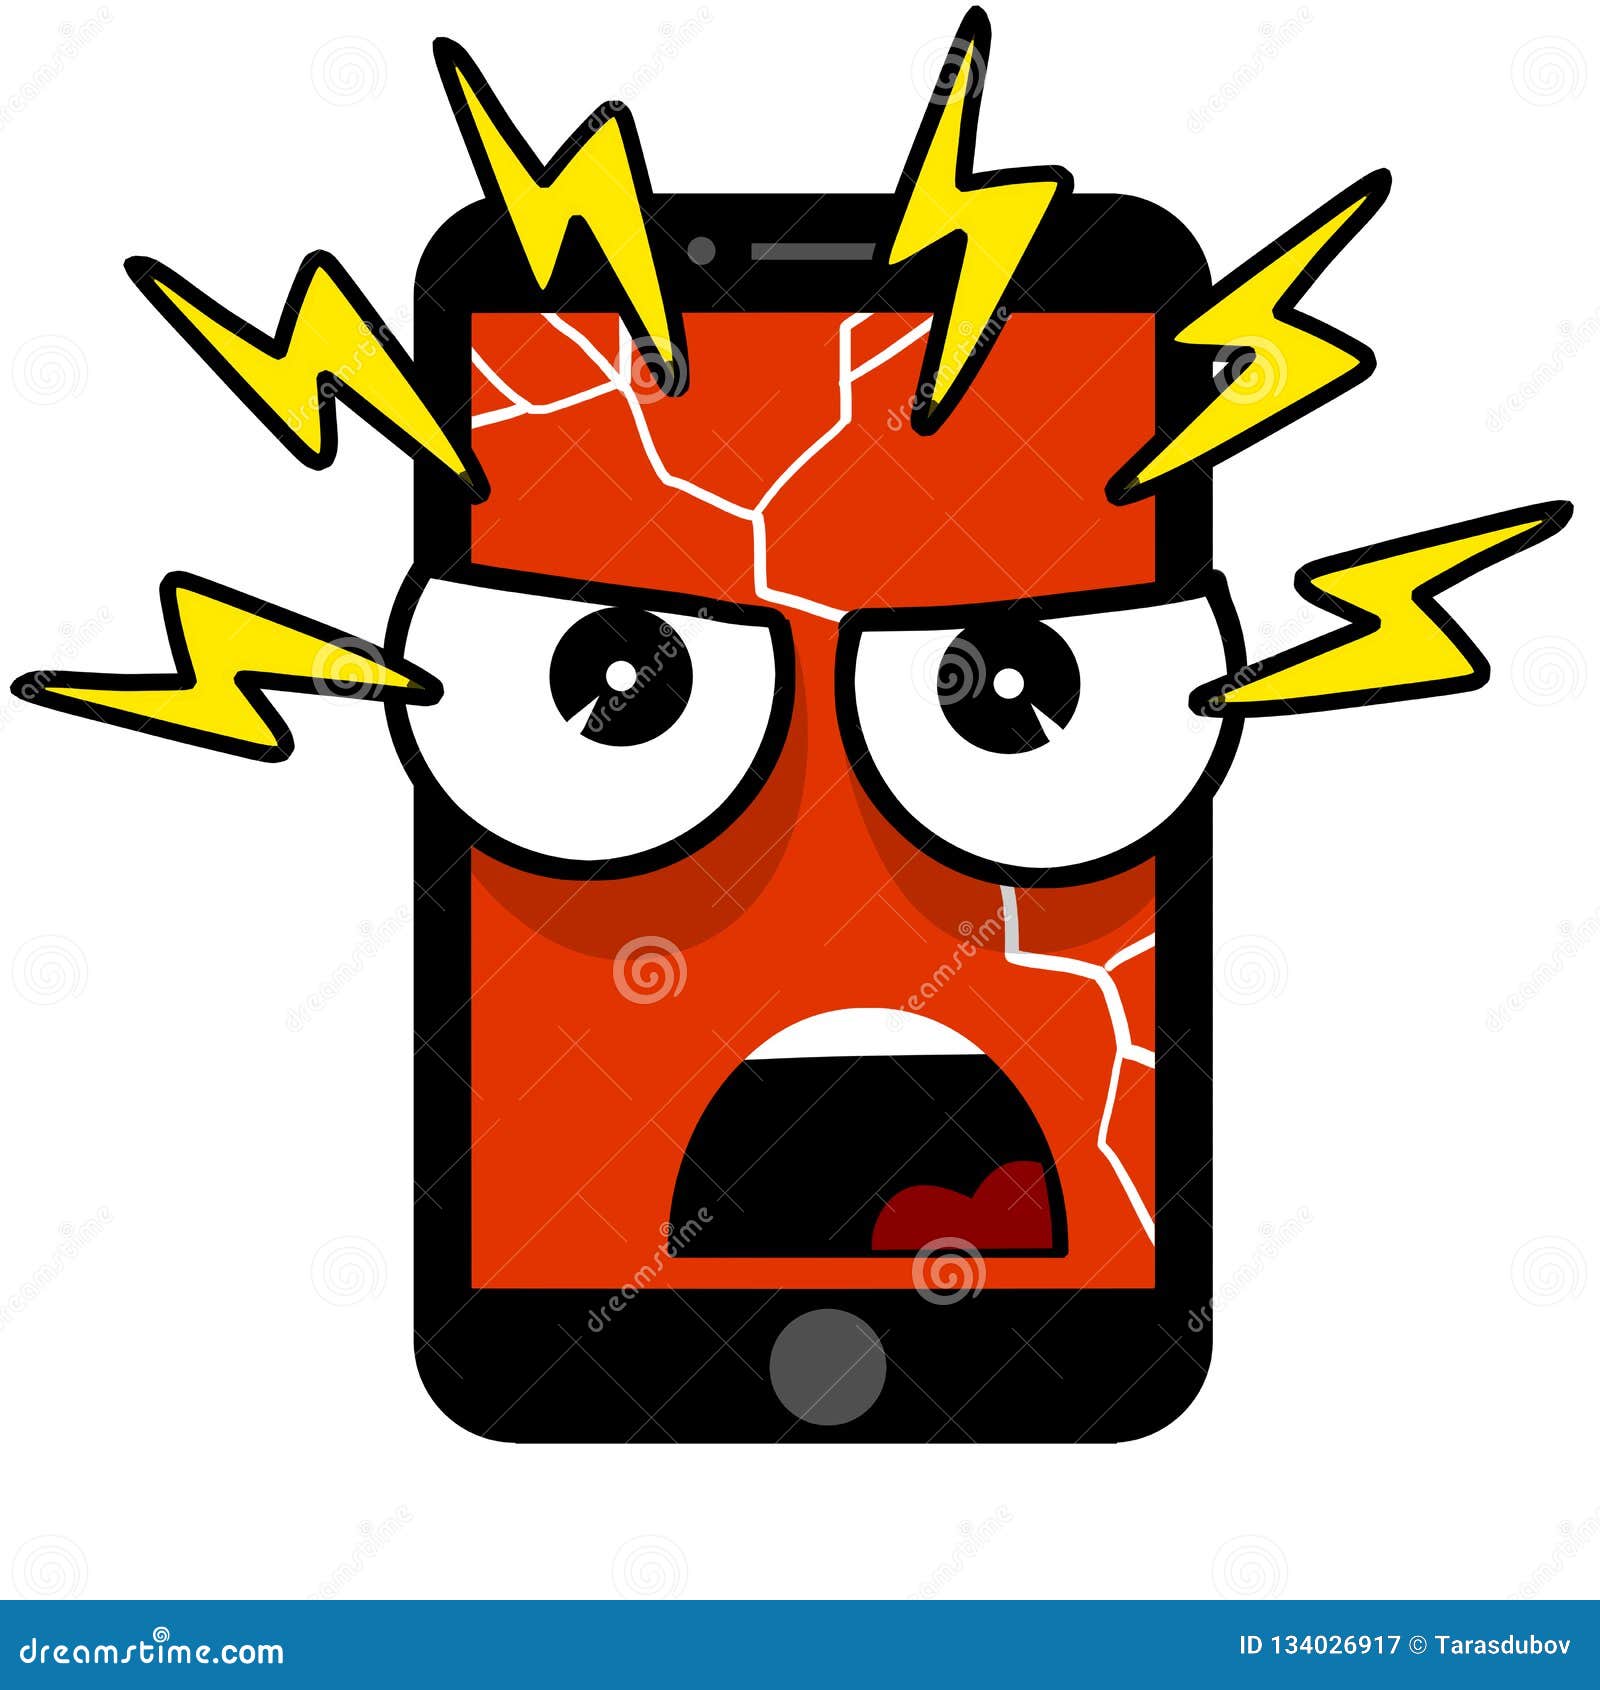 Mobile phone with an evil face. Cartoon flat illustration